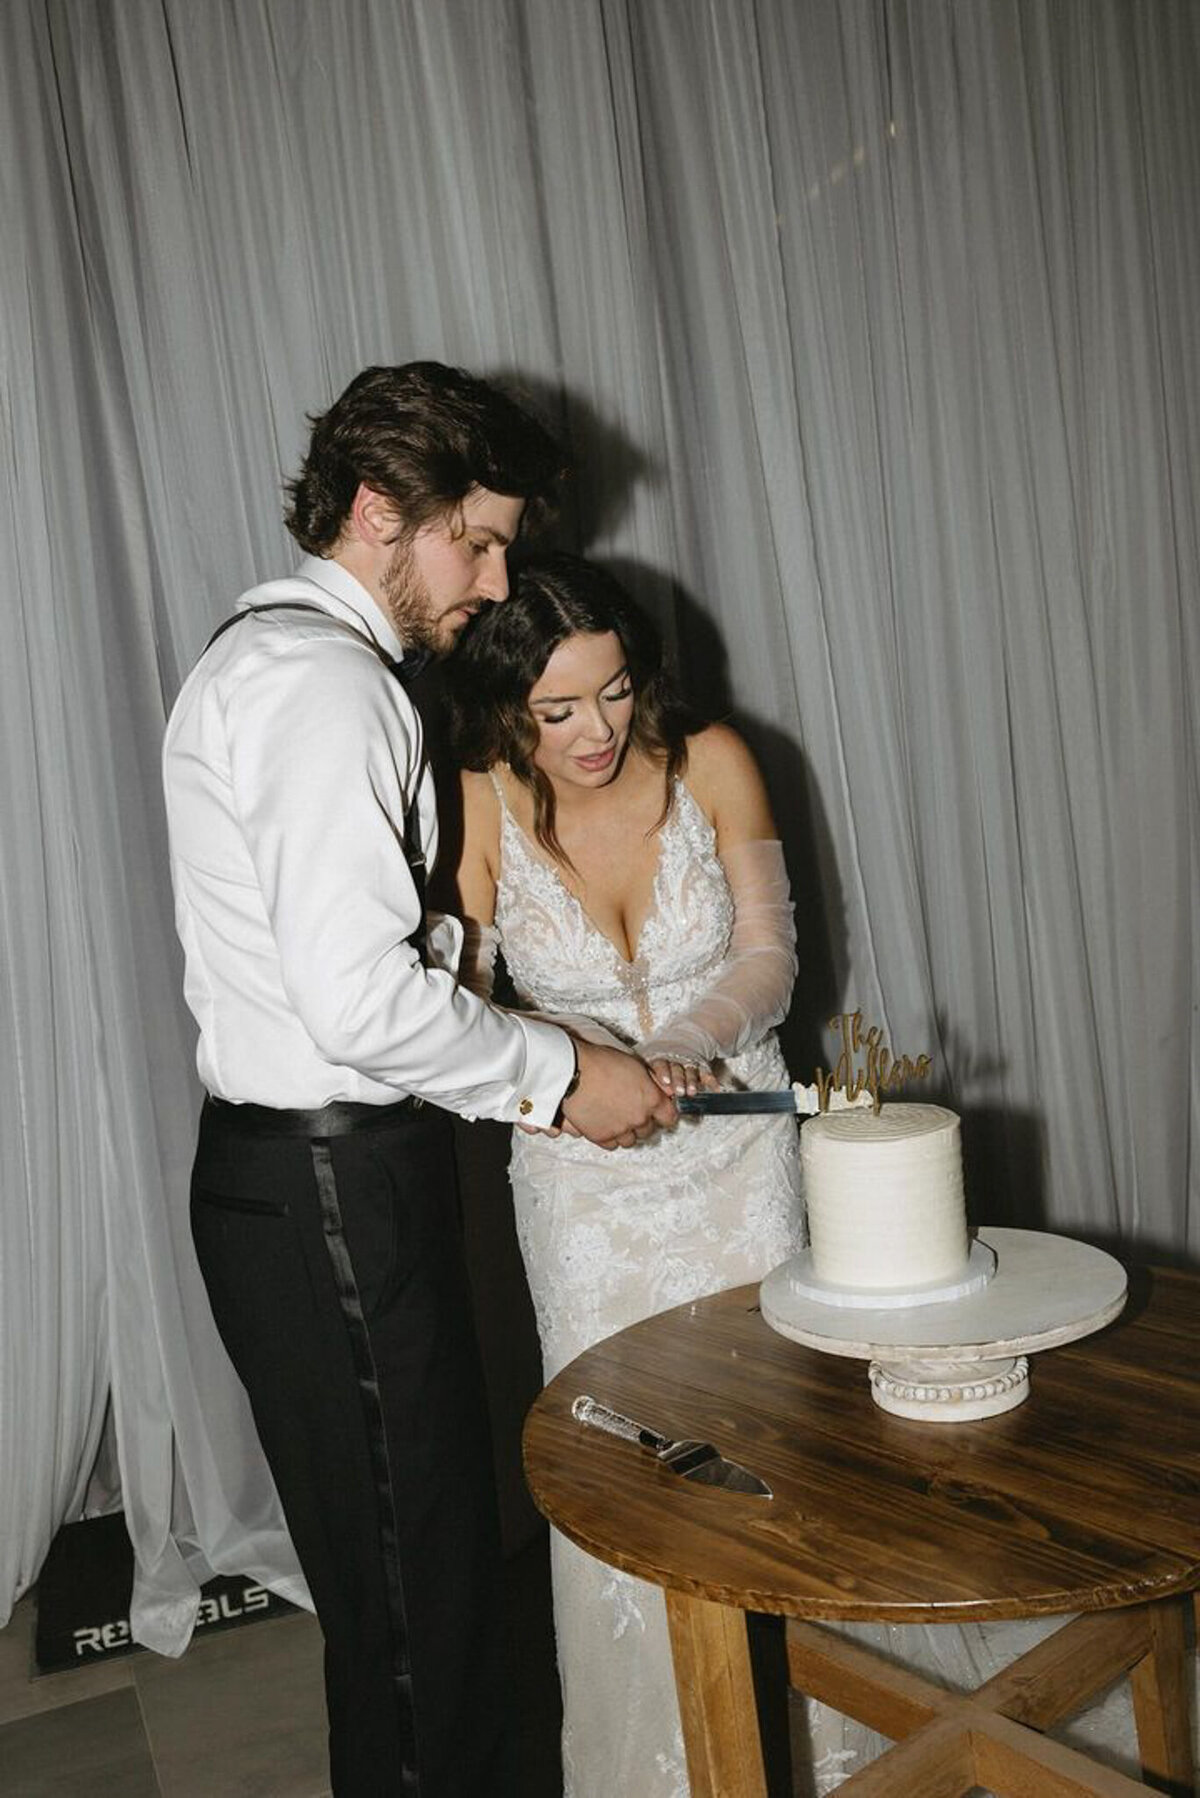 Couple cutting white wedding cake with floral accents by Sweets By Sue in Lethbridge, Alberta, featured on the Brontë Bride Vendor Guide.